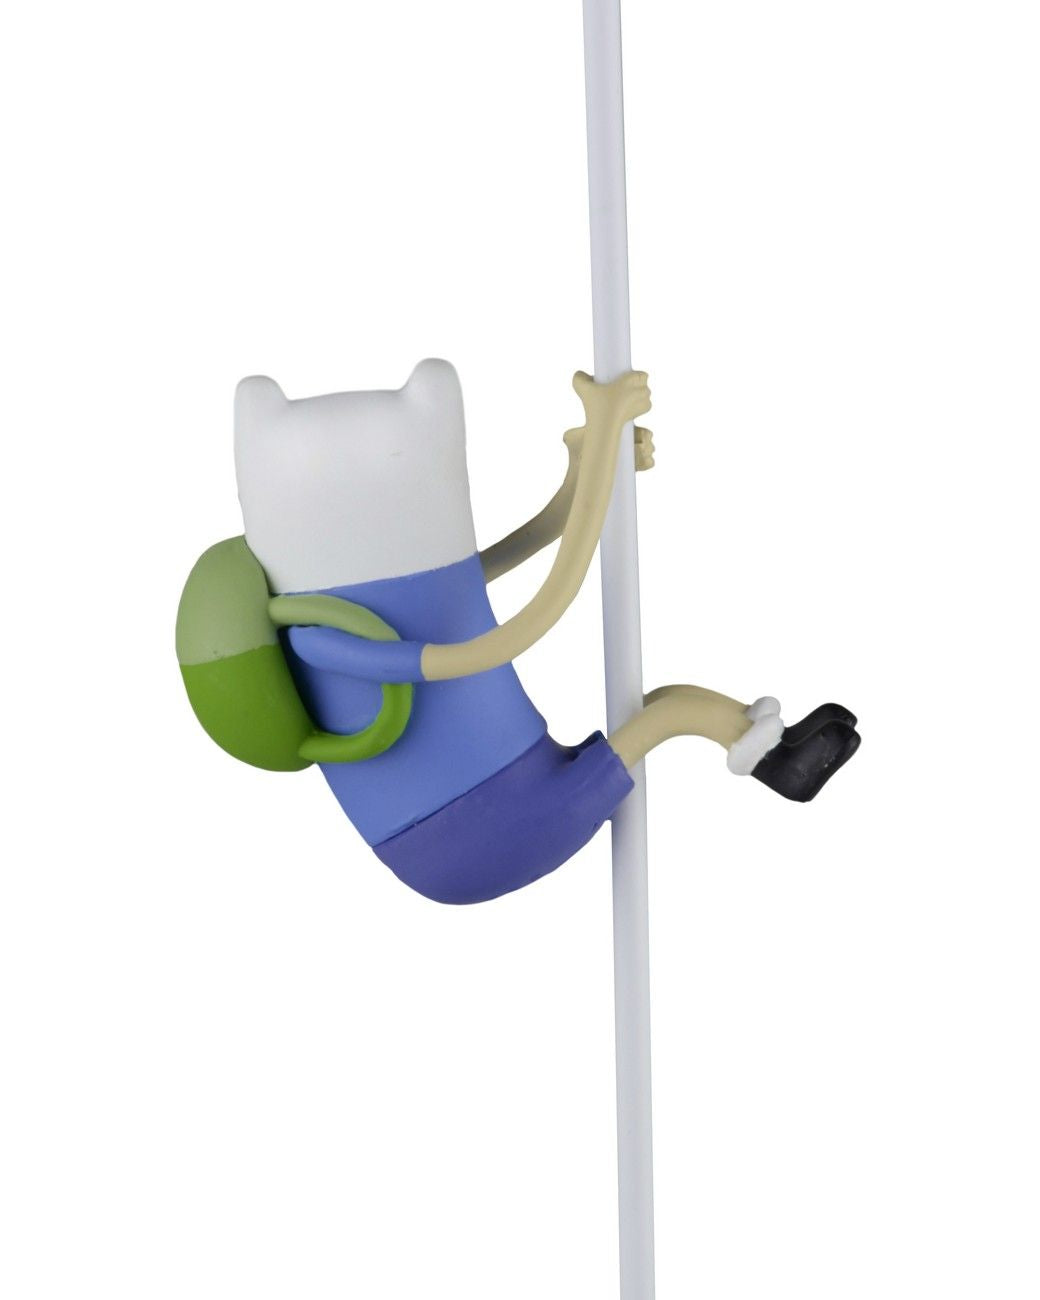 Adventure Time - Finn 2" Scalers - Ozzie Collectables